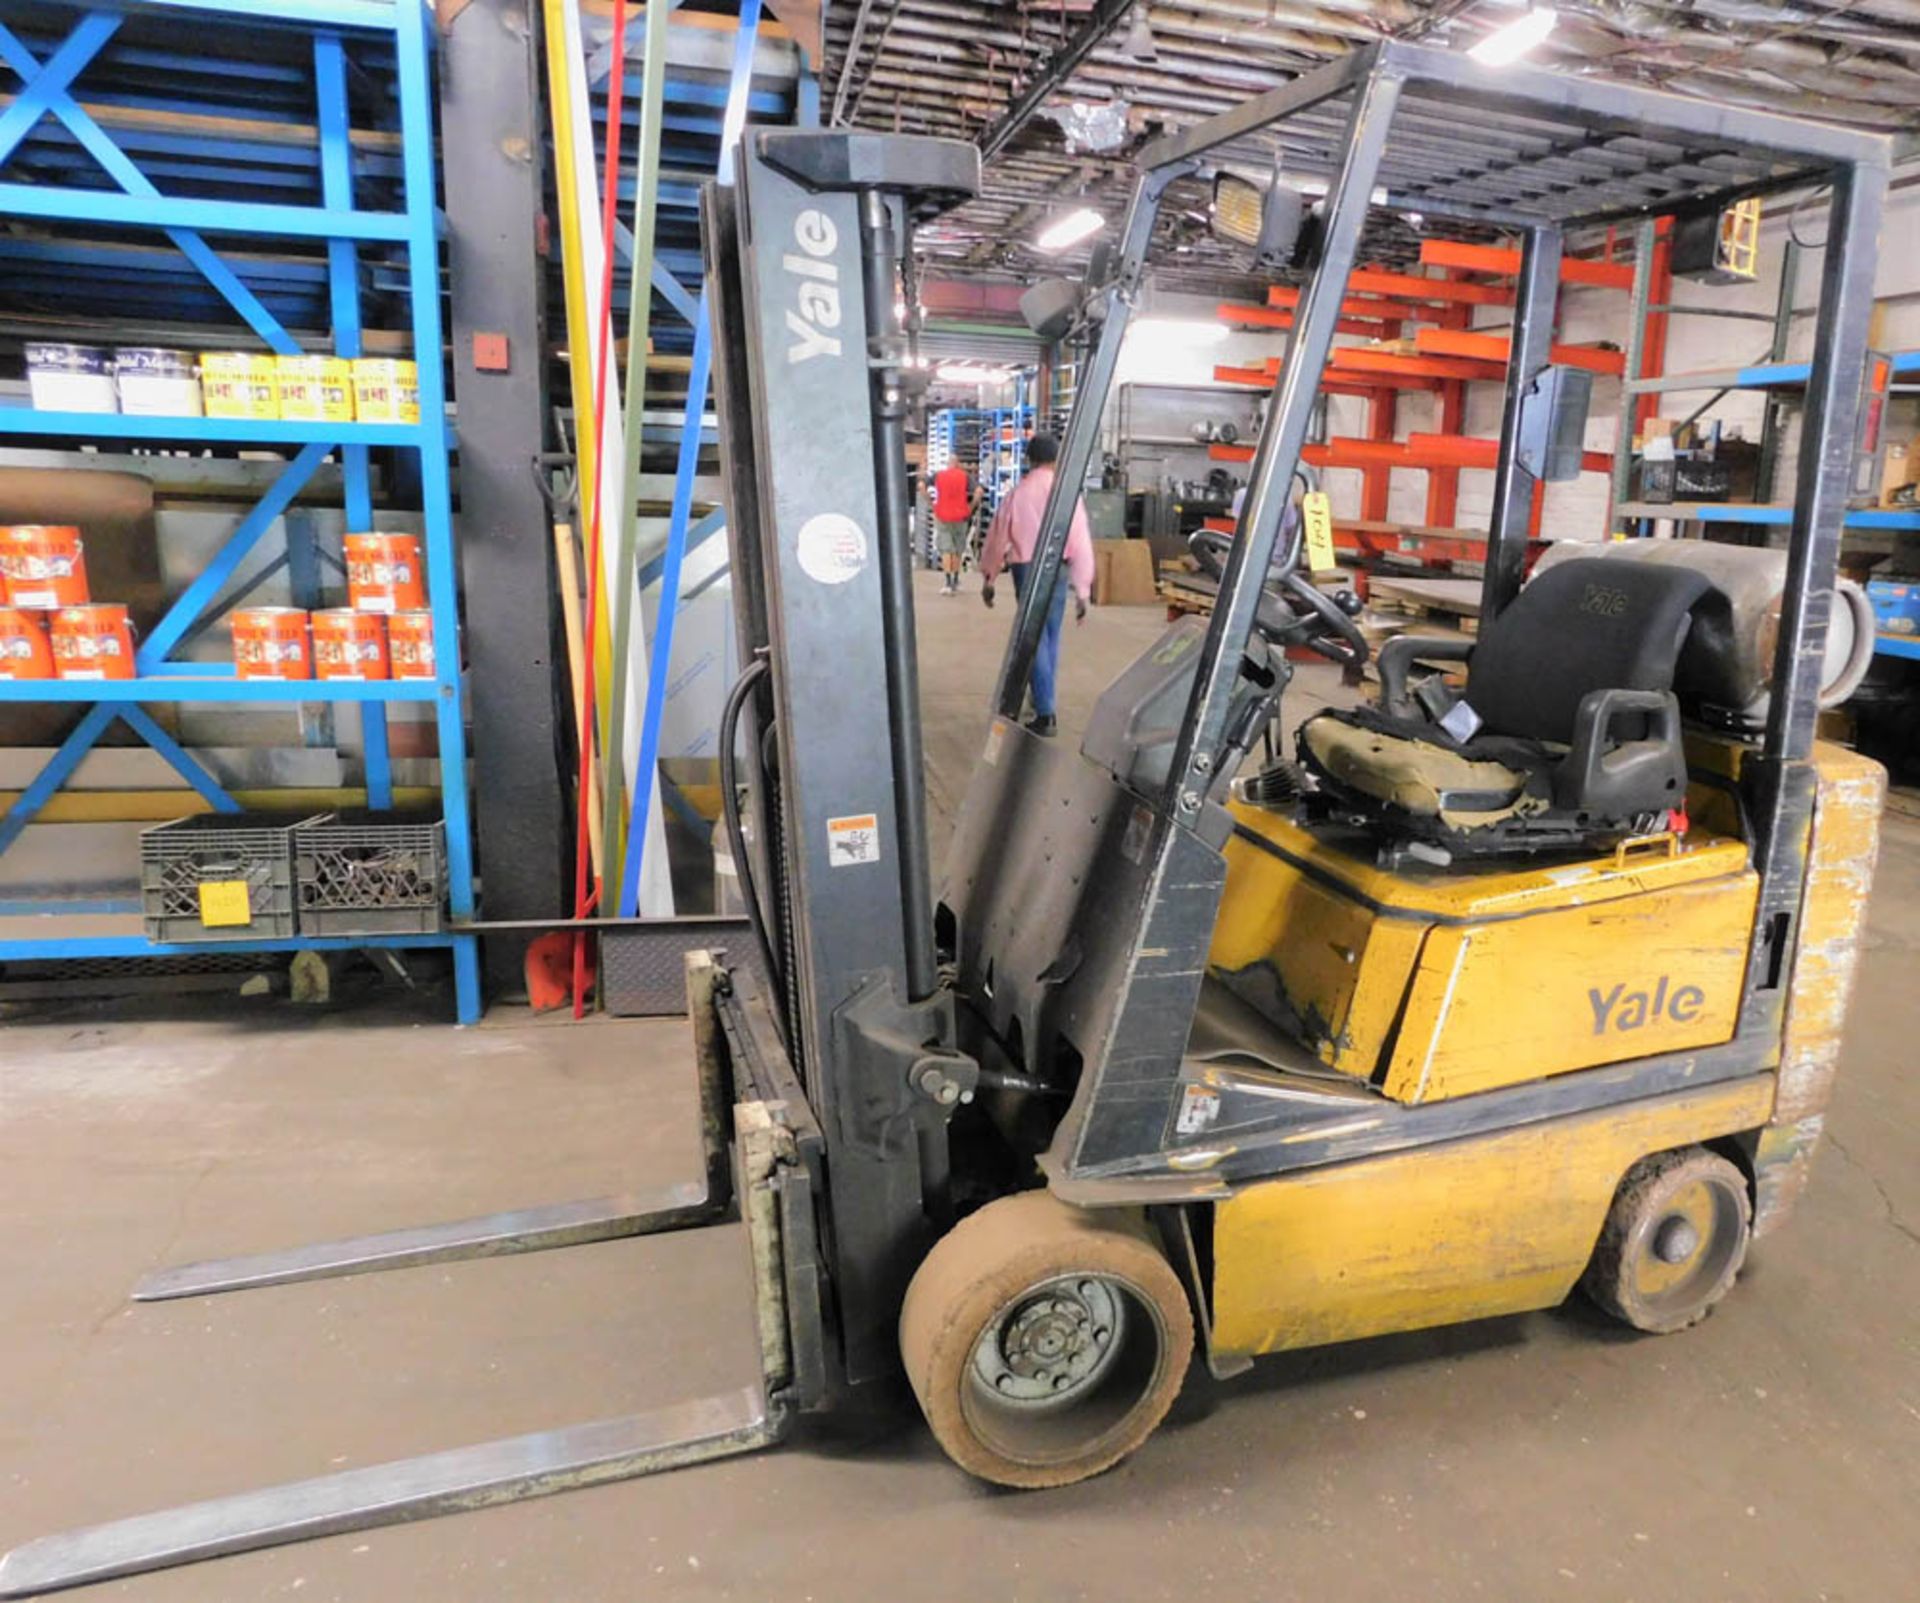 YALE 4000# CAPACITY LPG POWERED FORKLIFT, 3-STAGE MAST, 171.3" REACH, SIDE SHIFT, SOLID TIRES, 40"